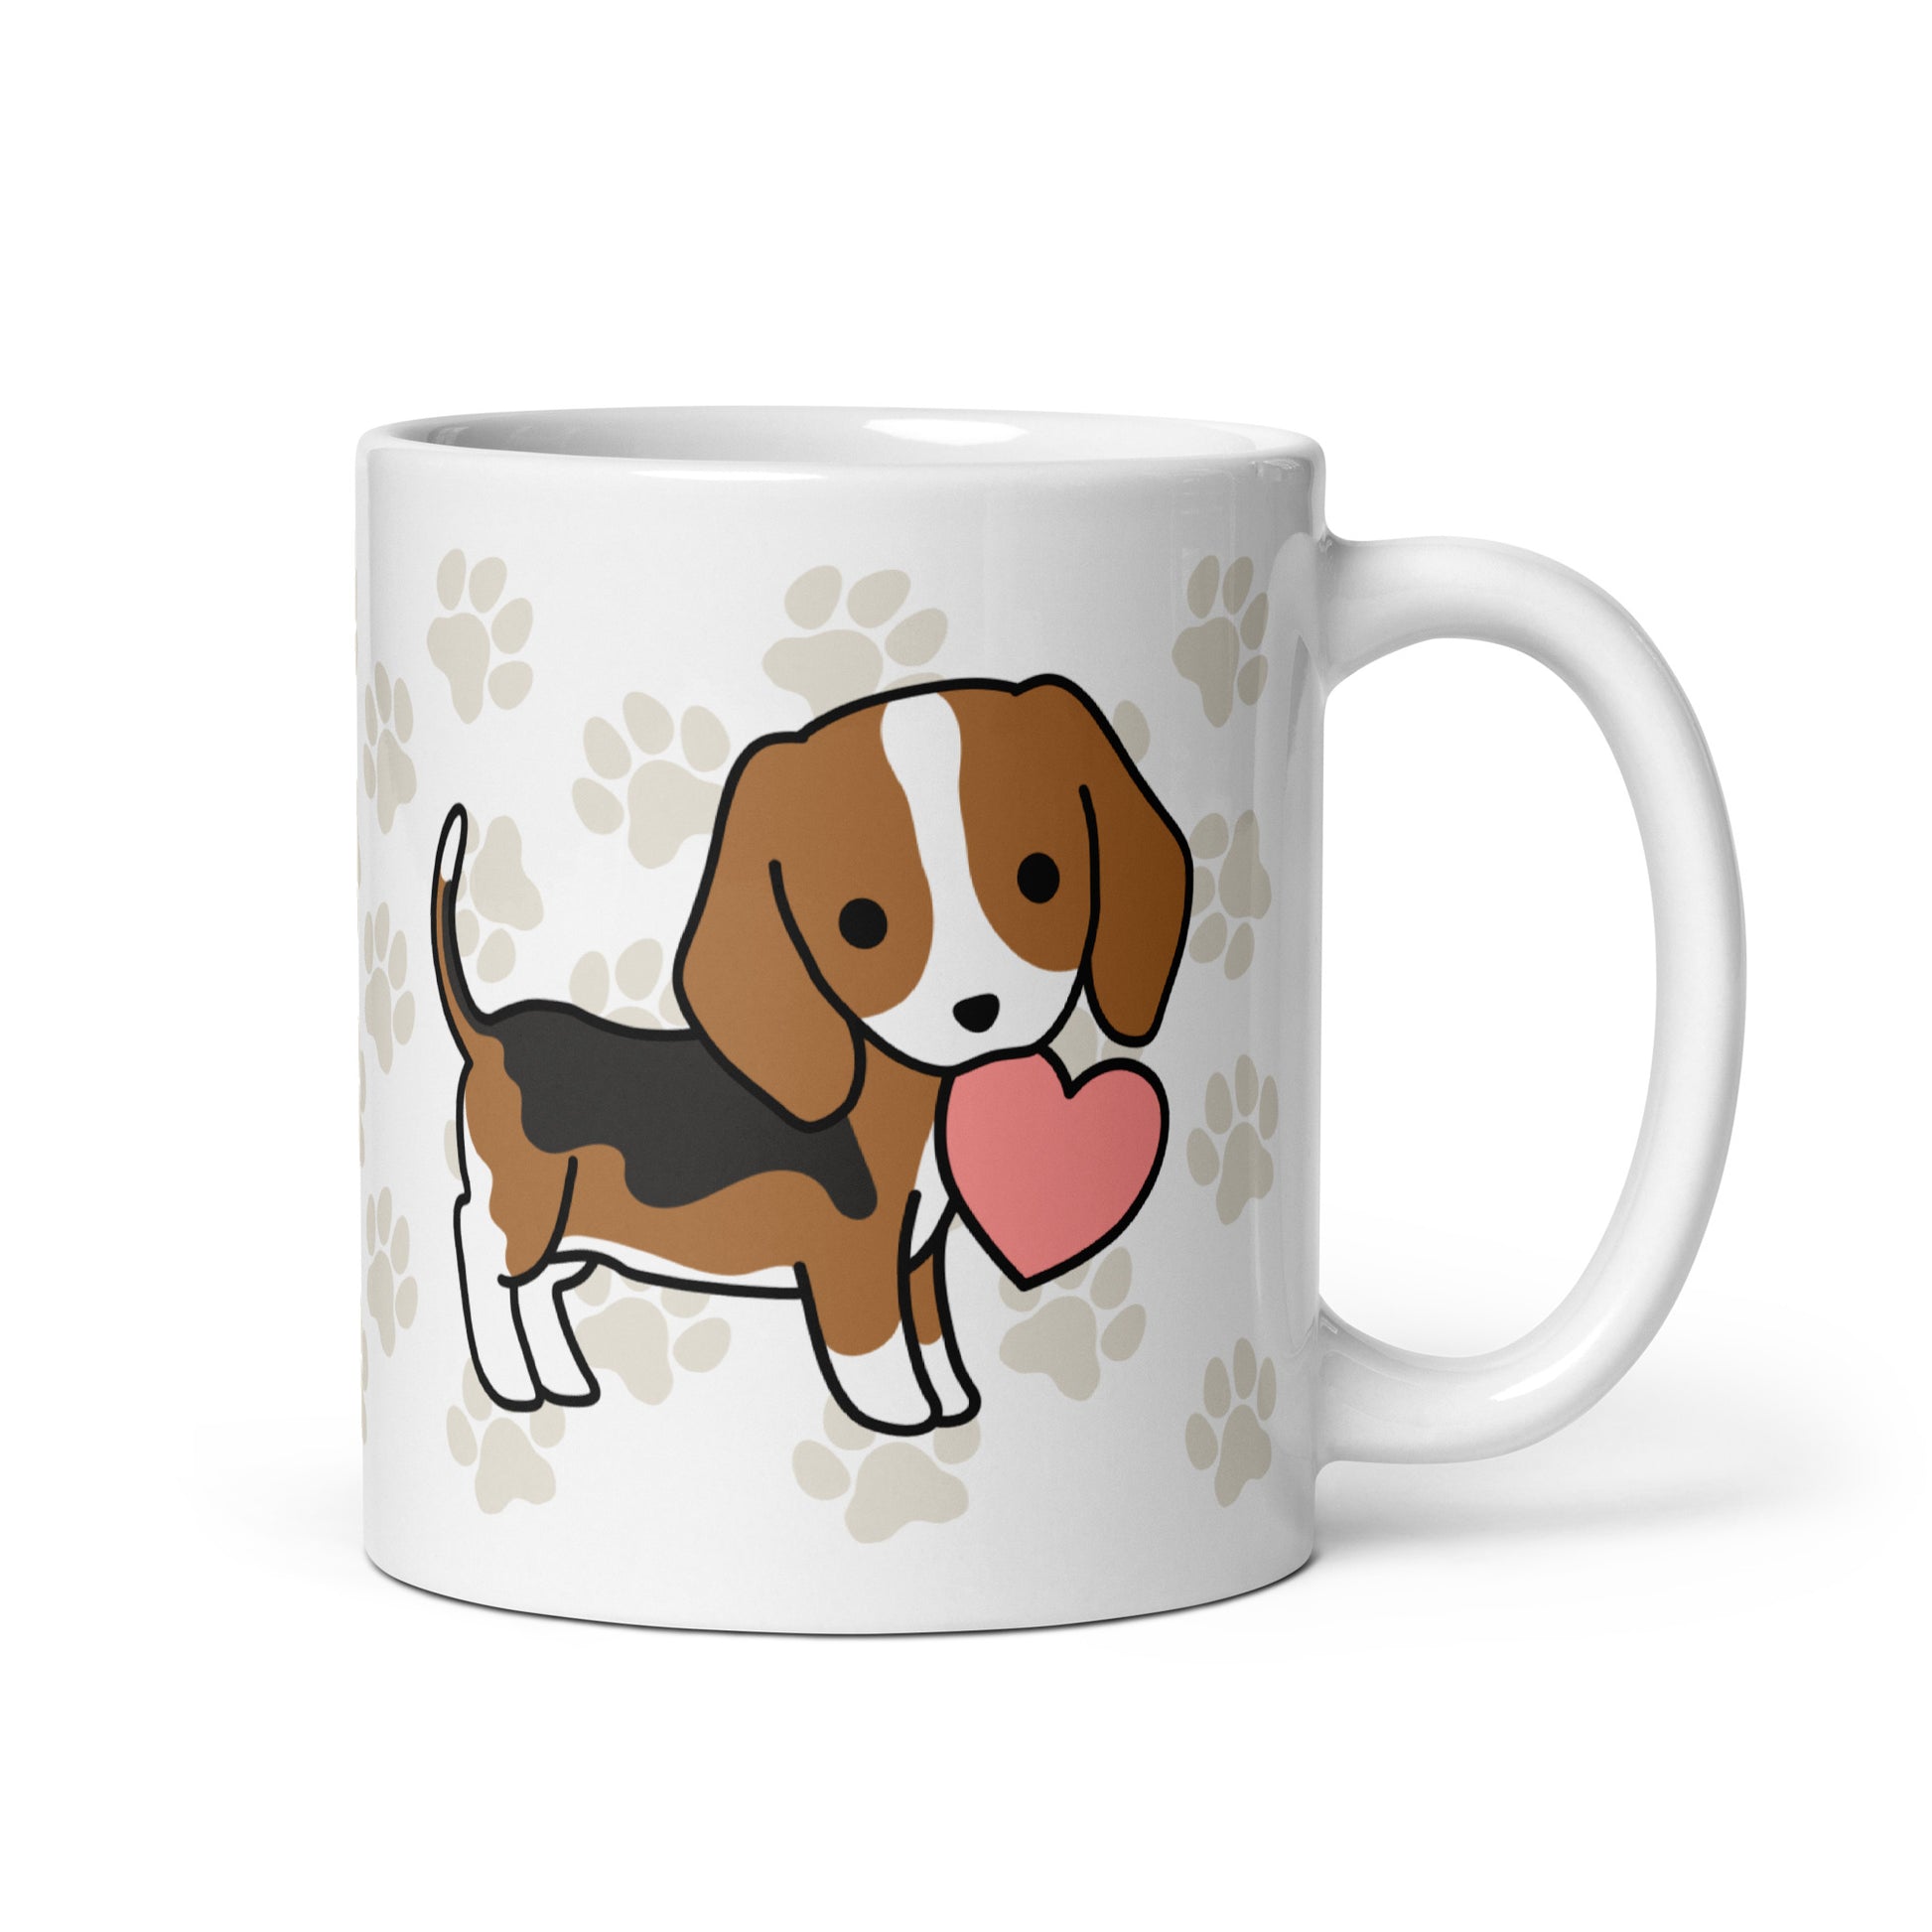 A white 11 ounce ceramic mug with a pattern of light brown pawprints all over. The mug also features a stylized illustration of a Beagle holding a heart in its mouth.